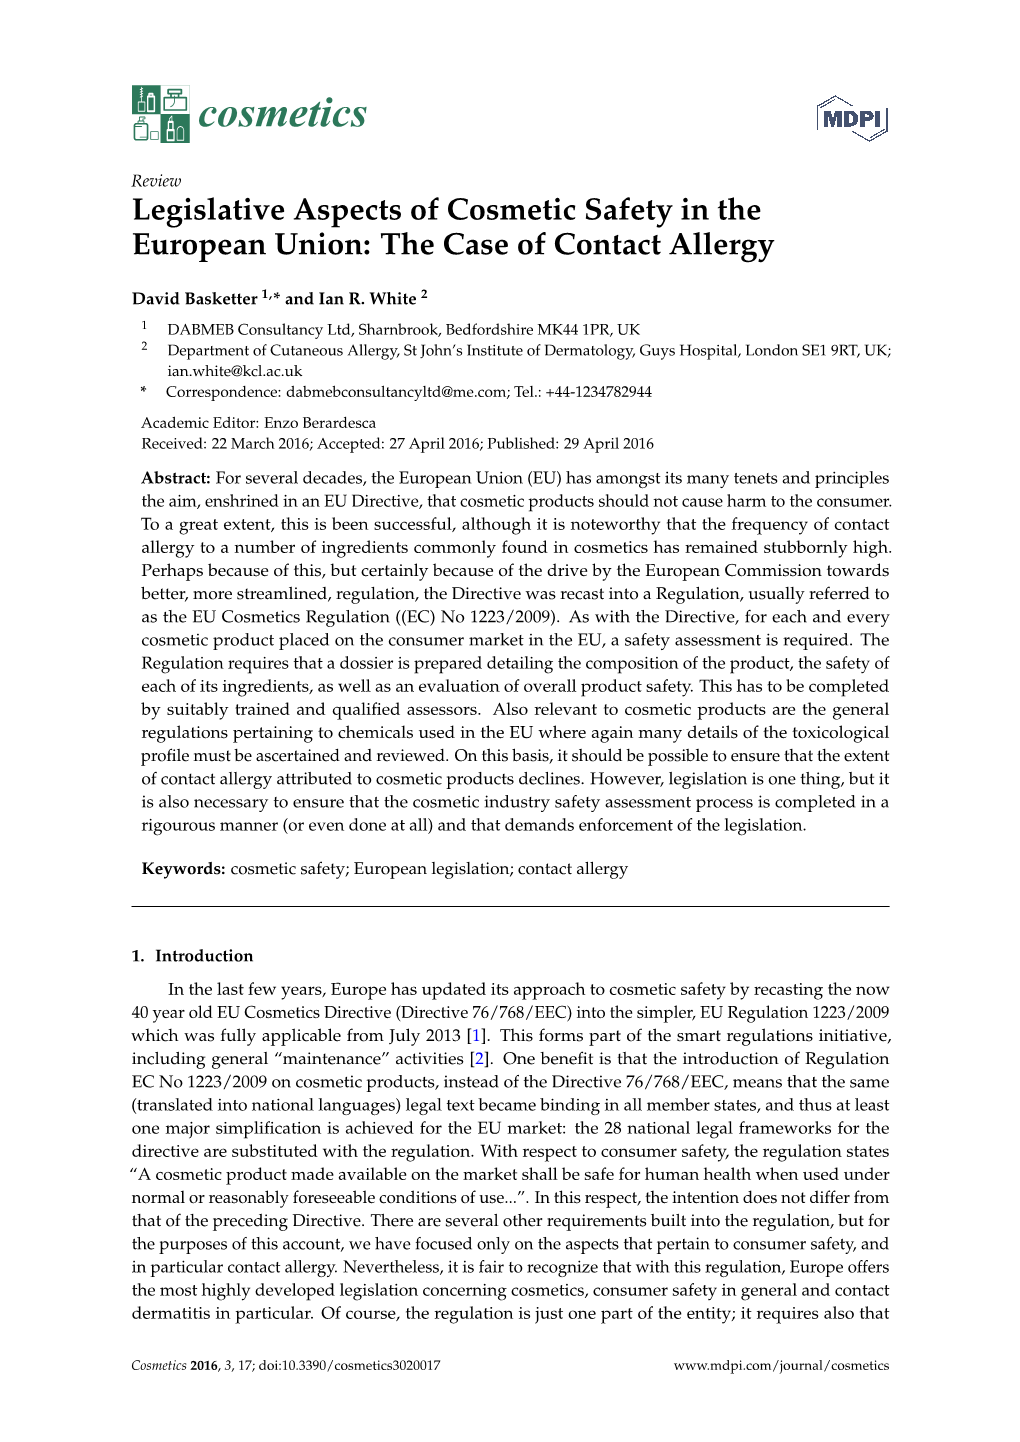 Legislative Aspects of Cosmetic Safety in the European Union: the Case of Contact Allergy